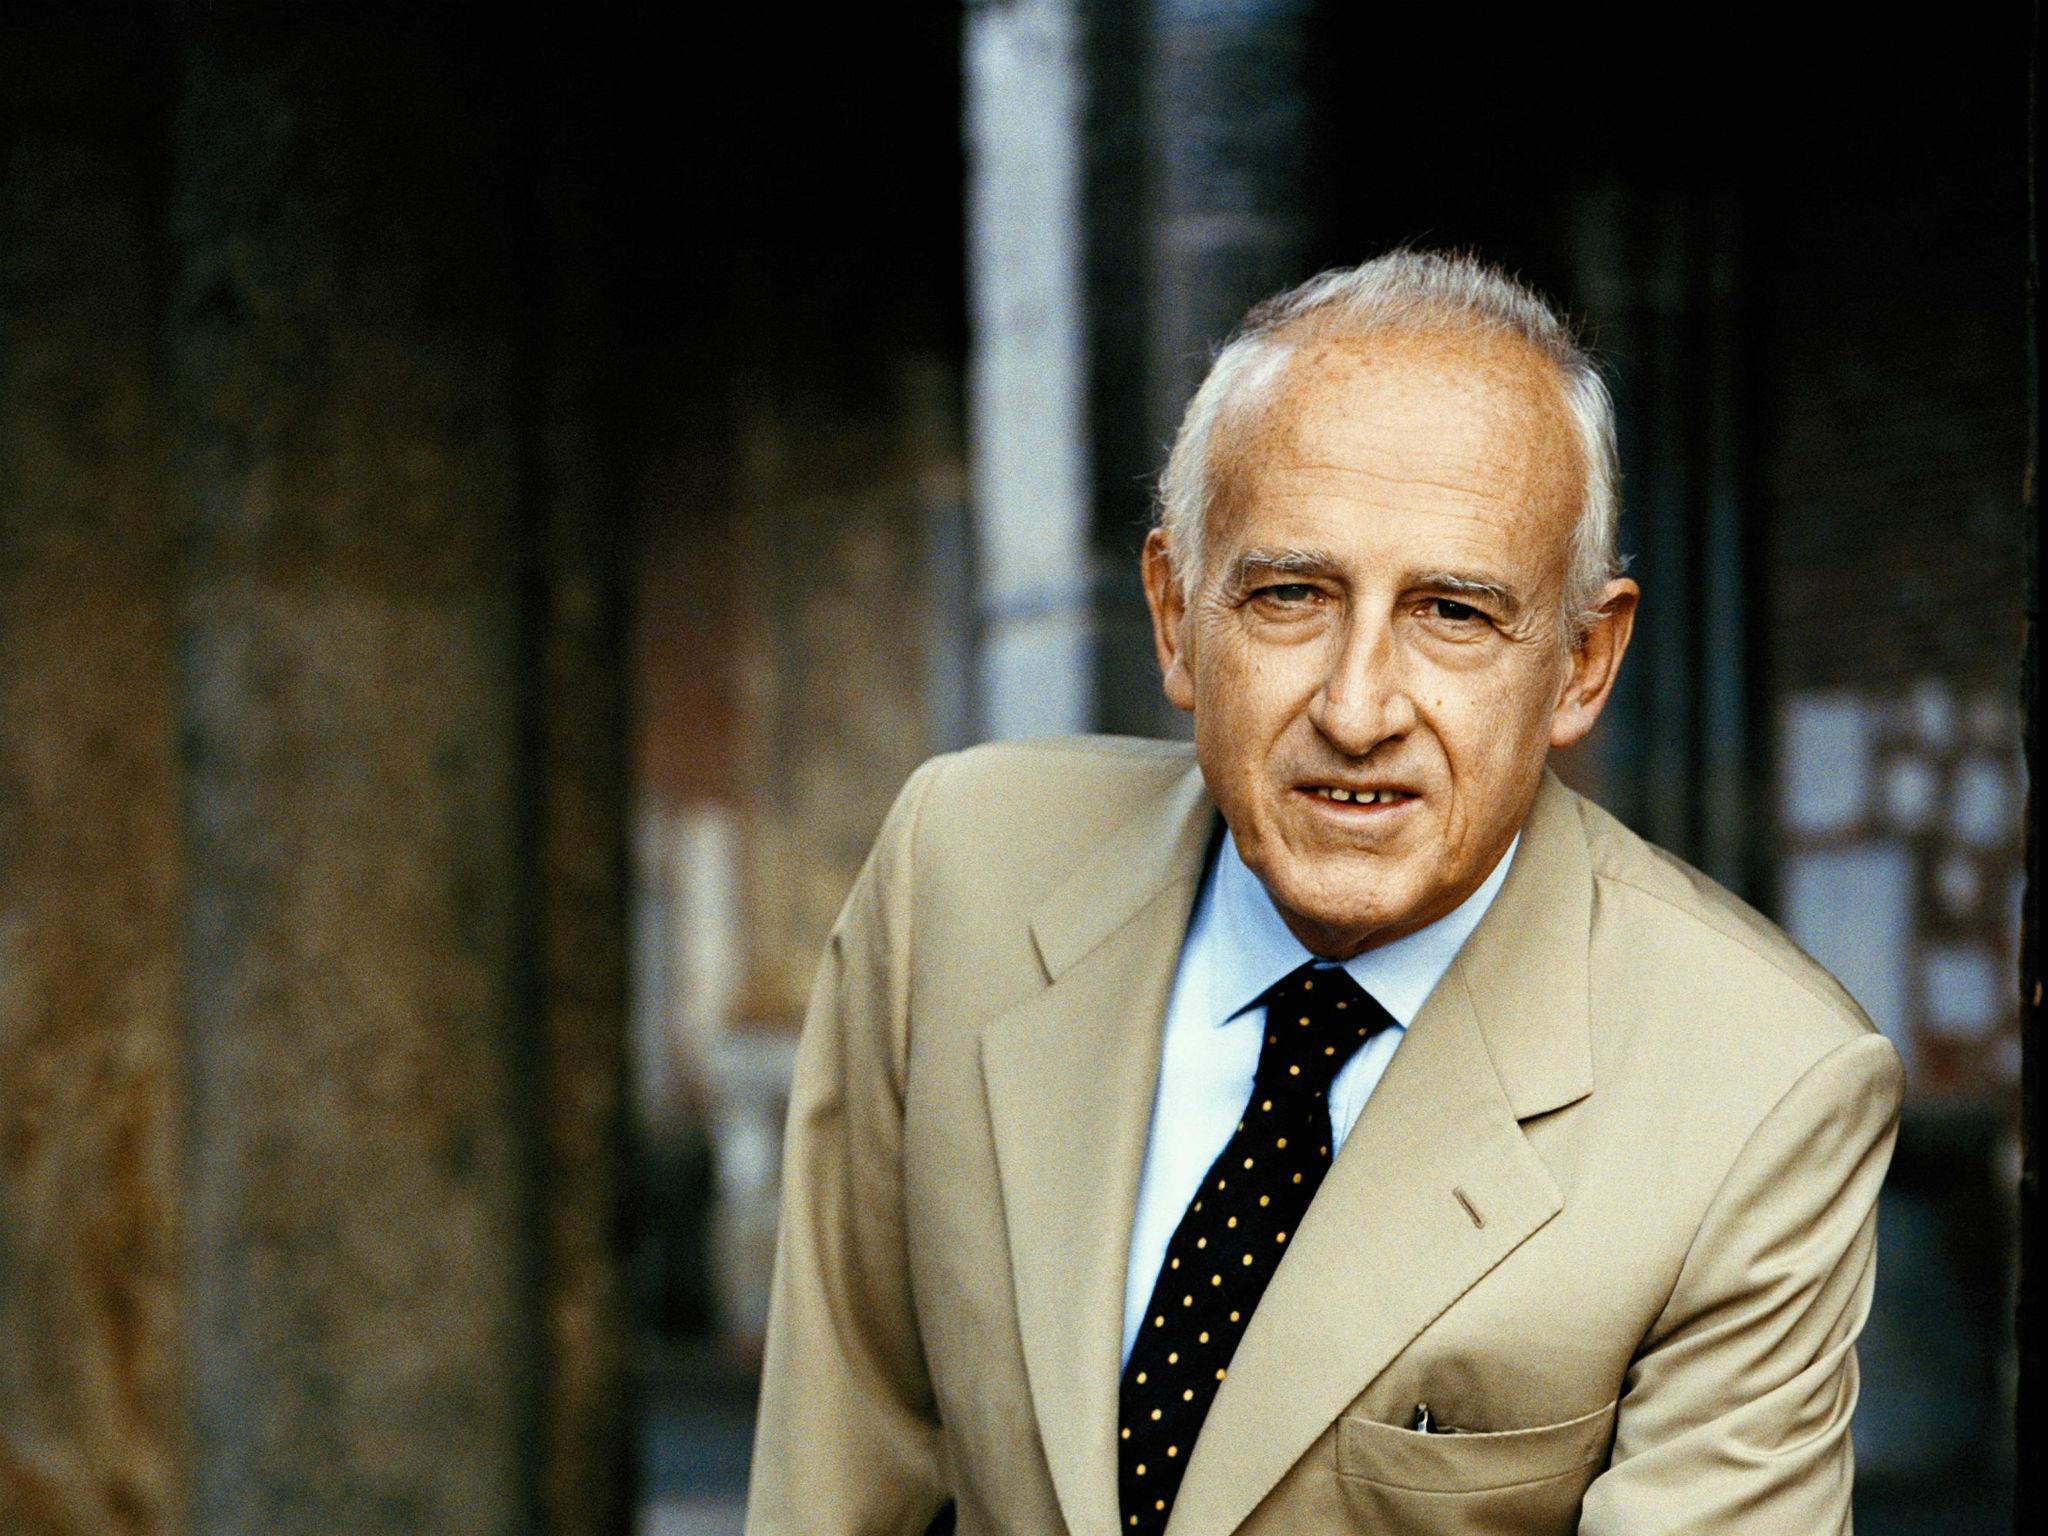 Maurizio Pollini followed his Chopin and Debussy recital earlier this month with an evening dedicated to Schoenberg and Beethoven